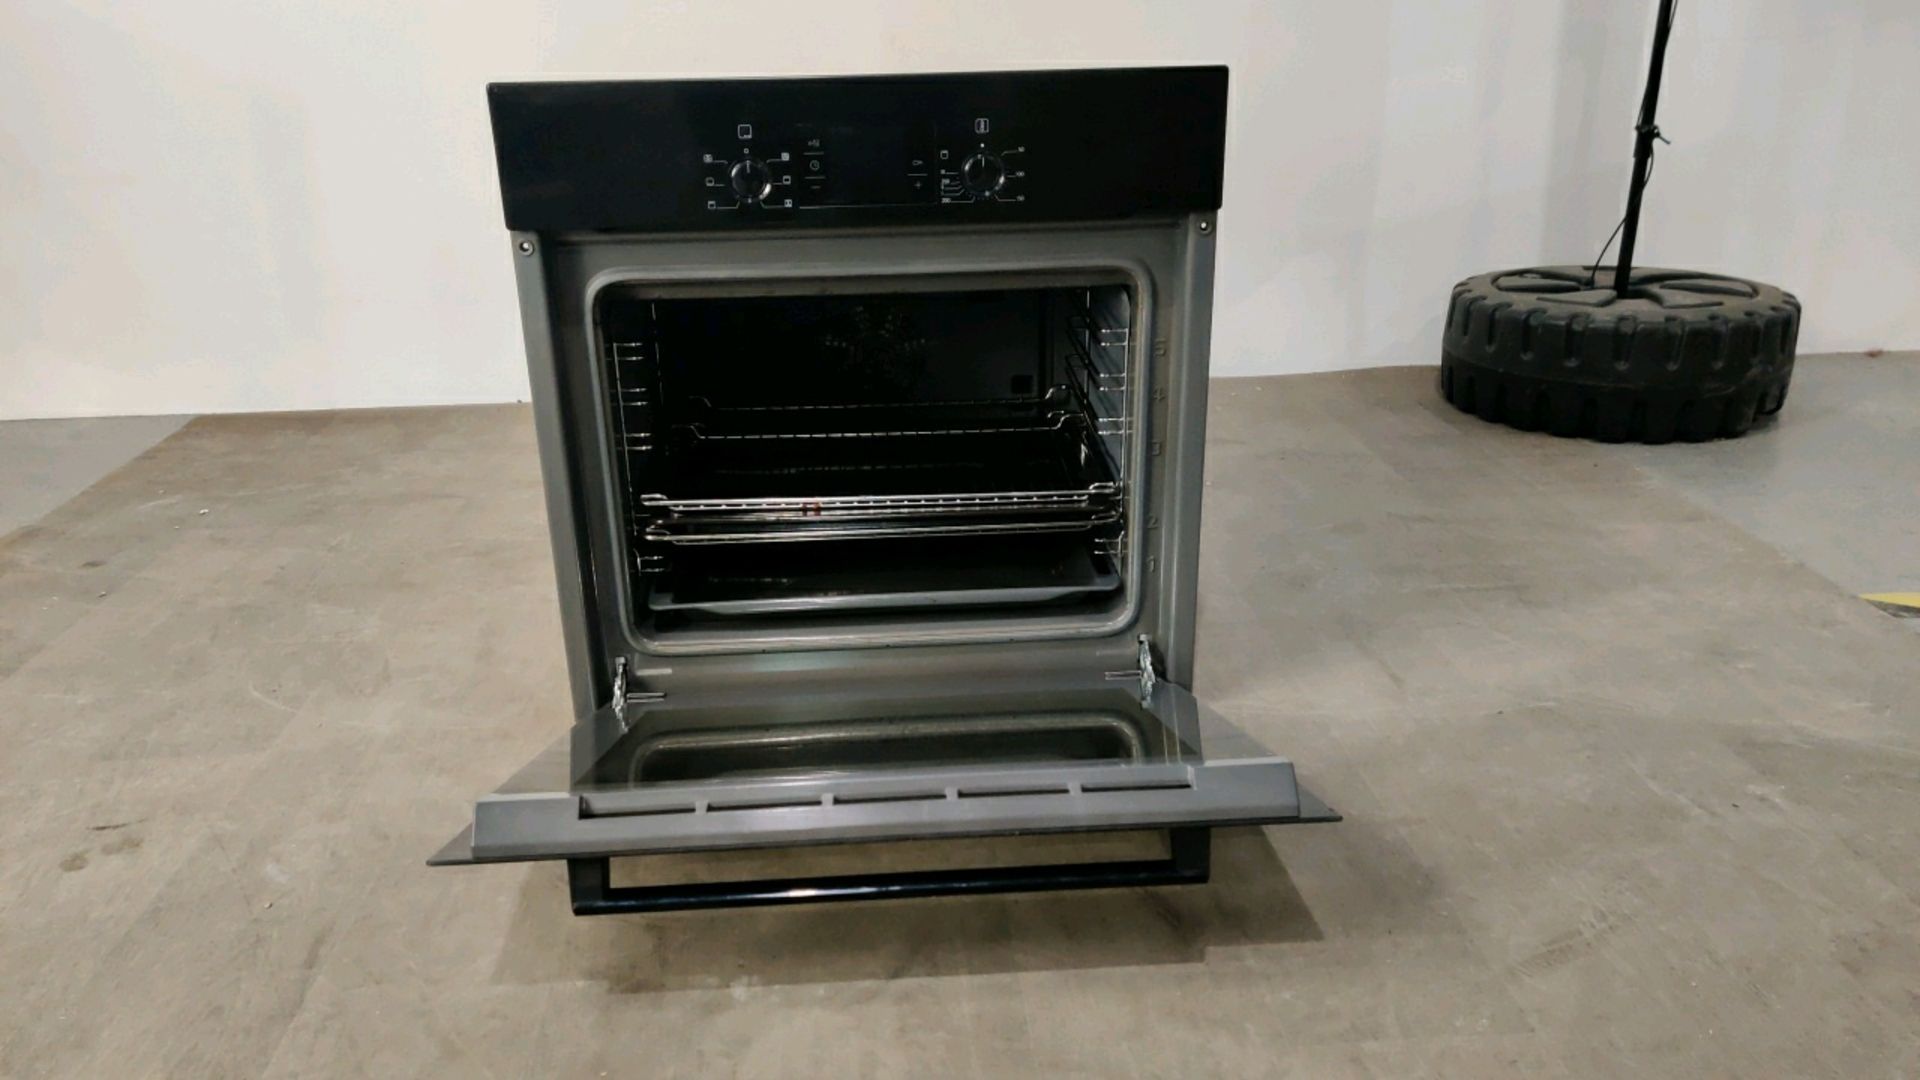 Bosch built-in oven - Image 3 of 3